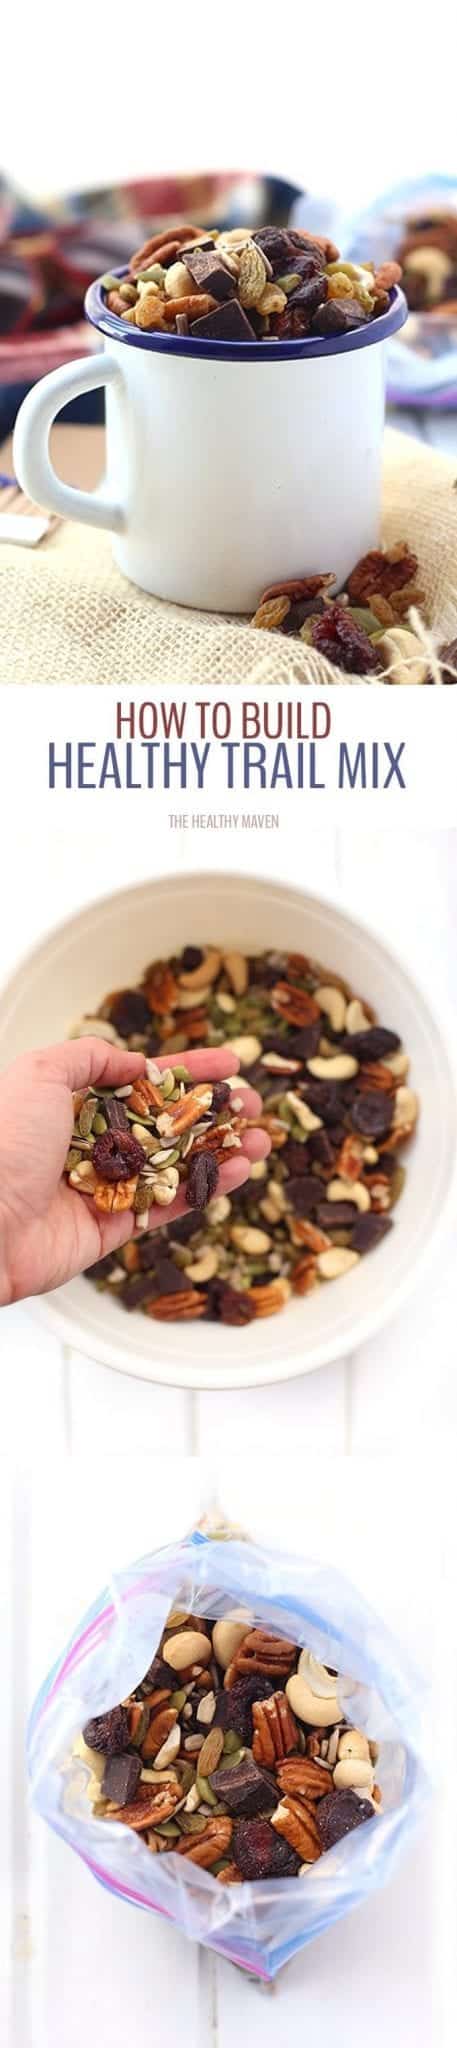 Not all trail mixes are created equal! With this tutorial on how to build a healthy trail mix, you'll get the low-down on what to include, what not to include and how to customize your trail mix to your needs and wants!